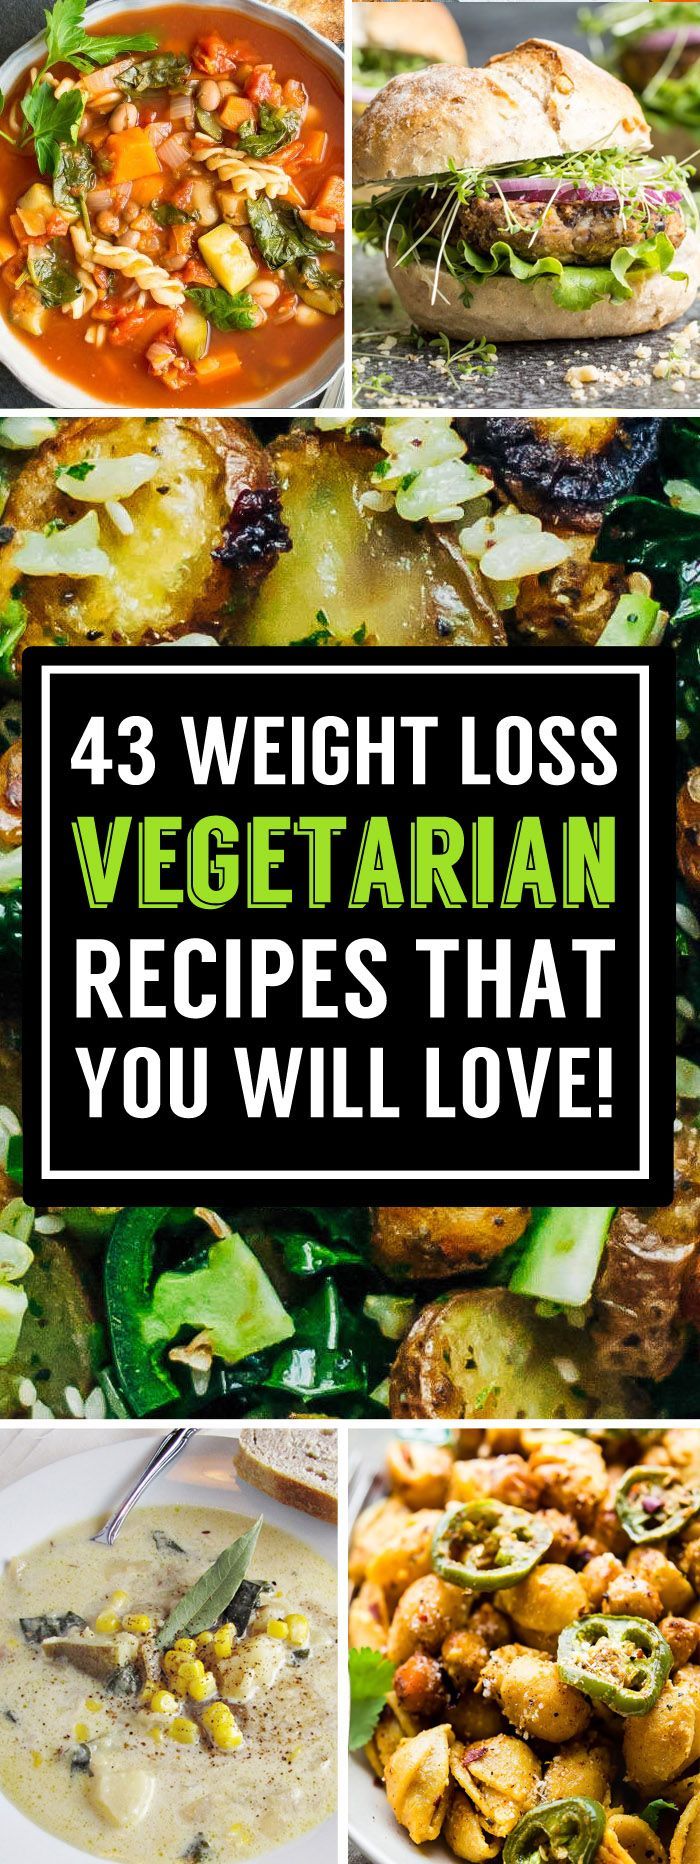 43 Delicious Vegetarian Recipes That Can Help Boost Your Diet Gains! -   15 healthy recipes vegetarian
 ideas